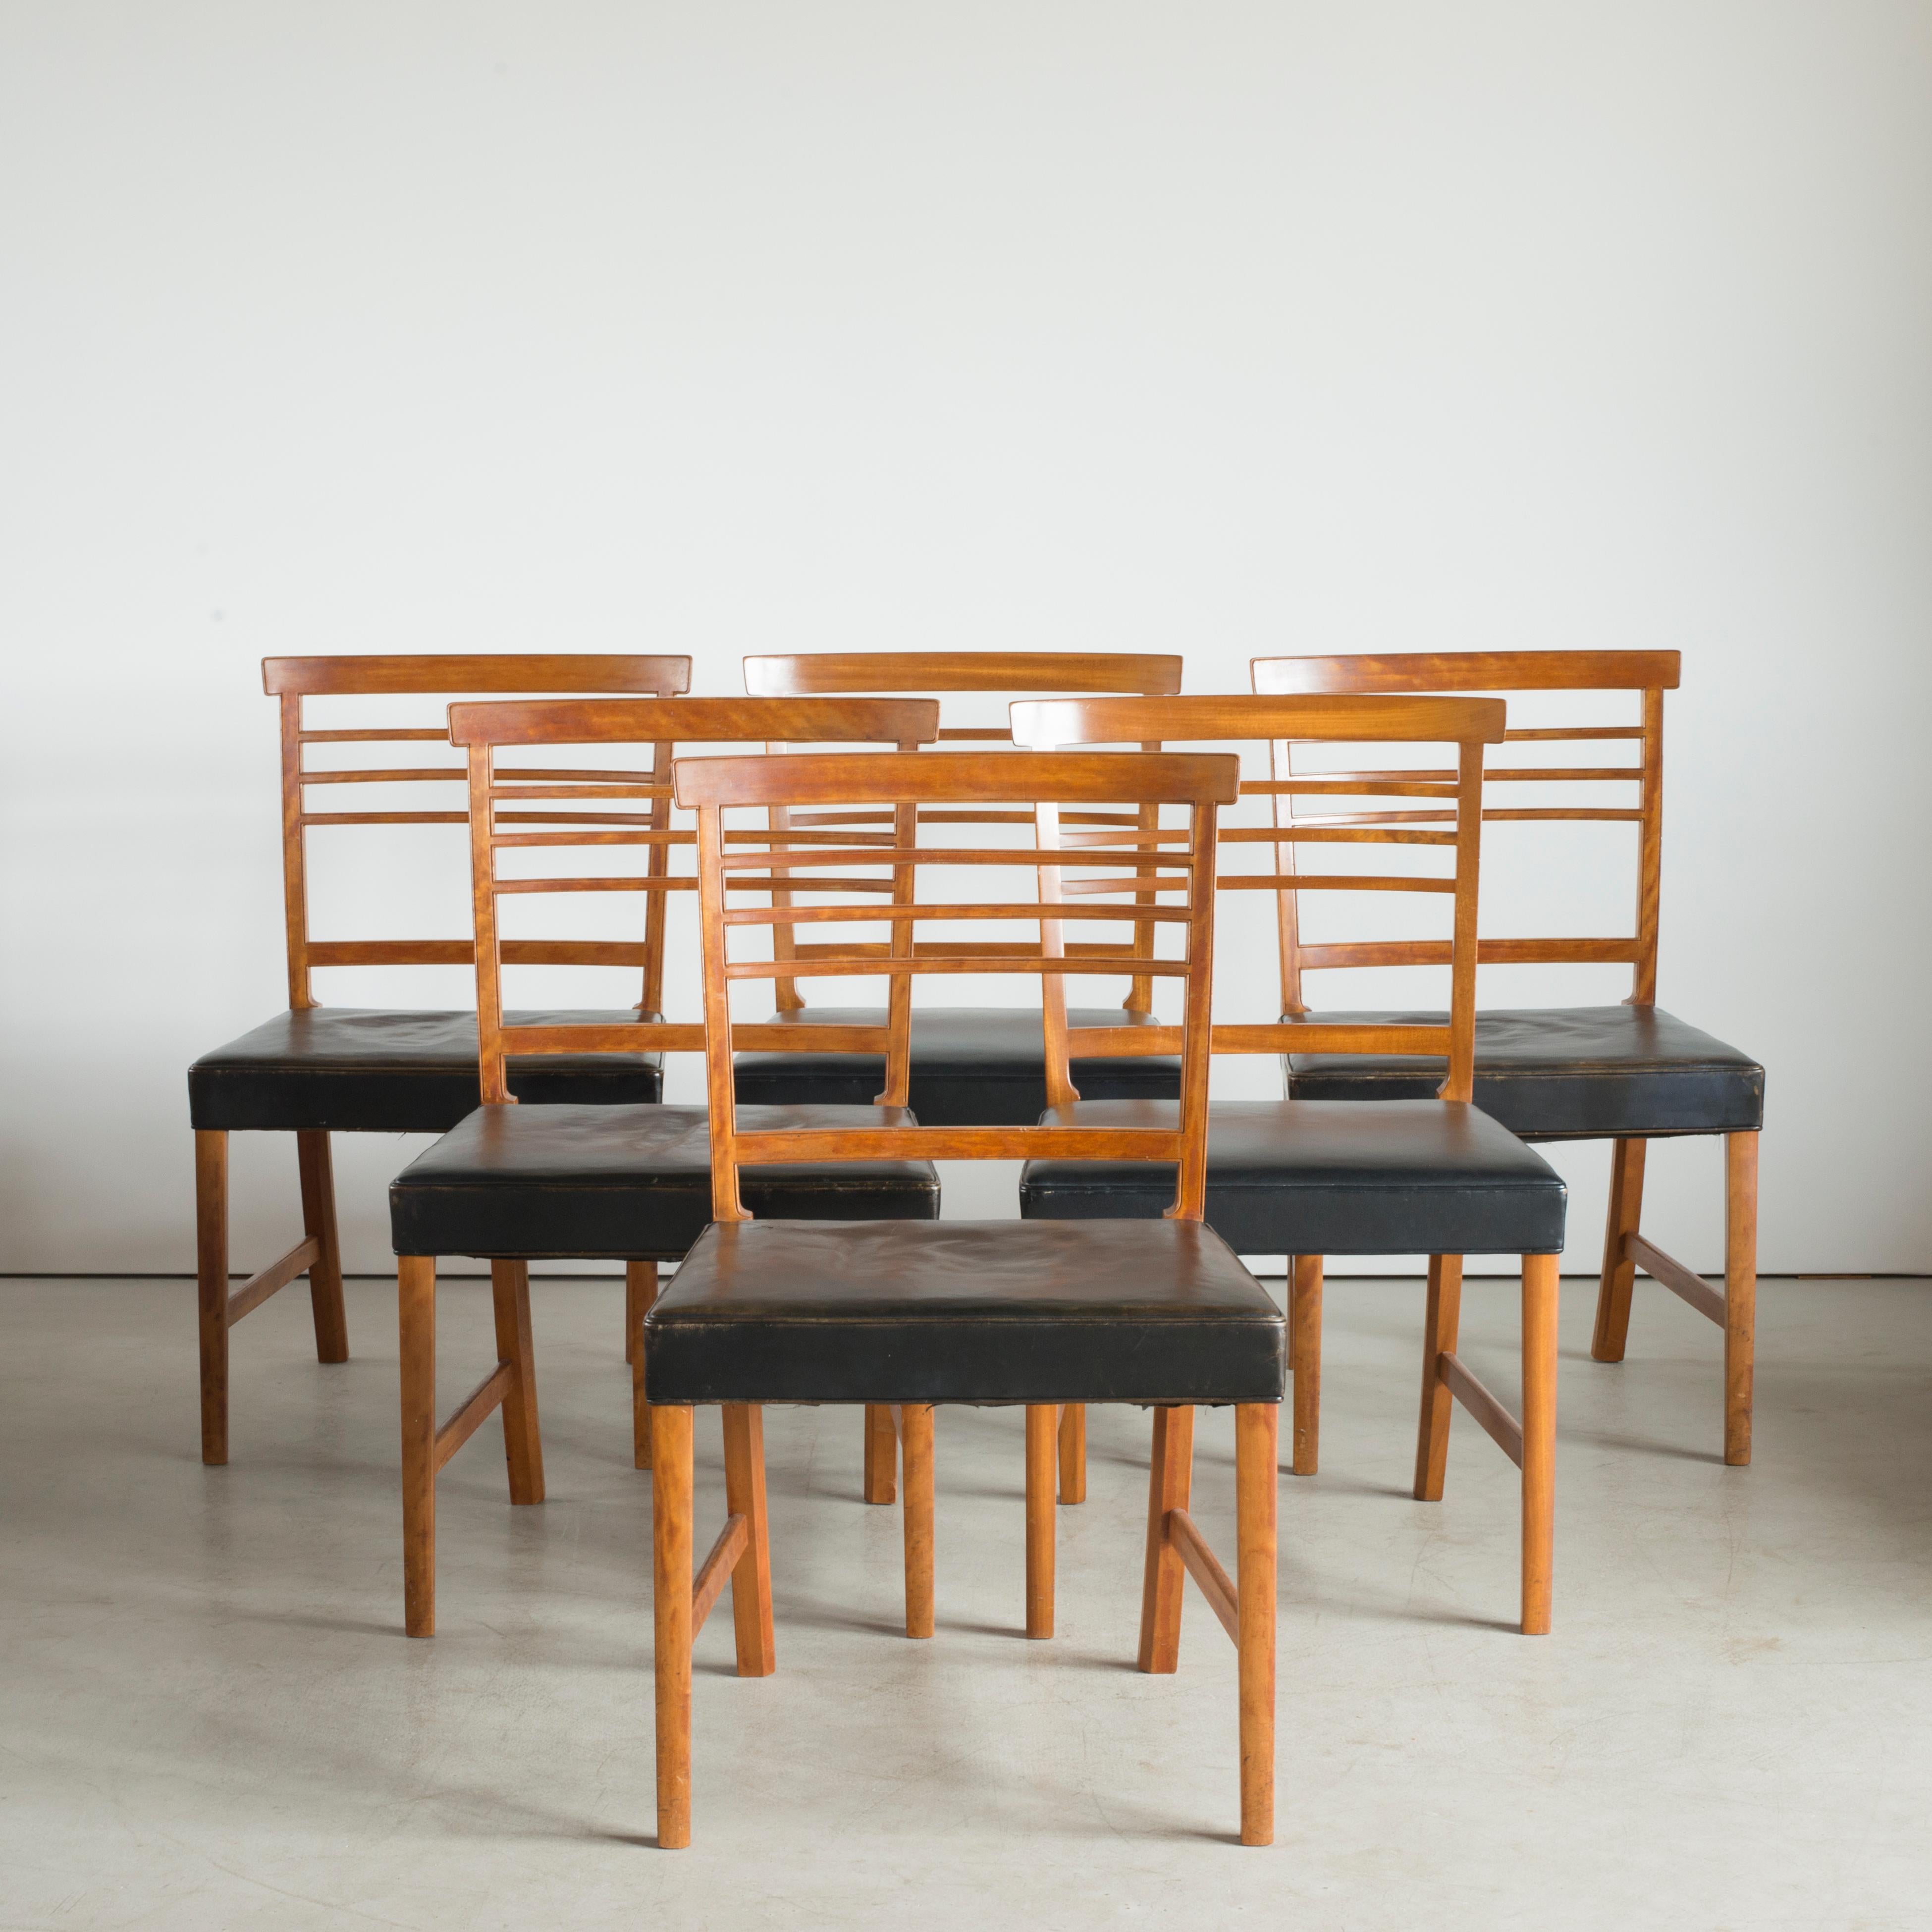 Ole Wanscher set of six chairs in mahogany with seats of black leather. Executed by A. J. Iversen, Copenhagen, Denmark.